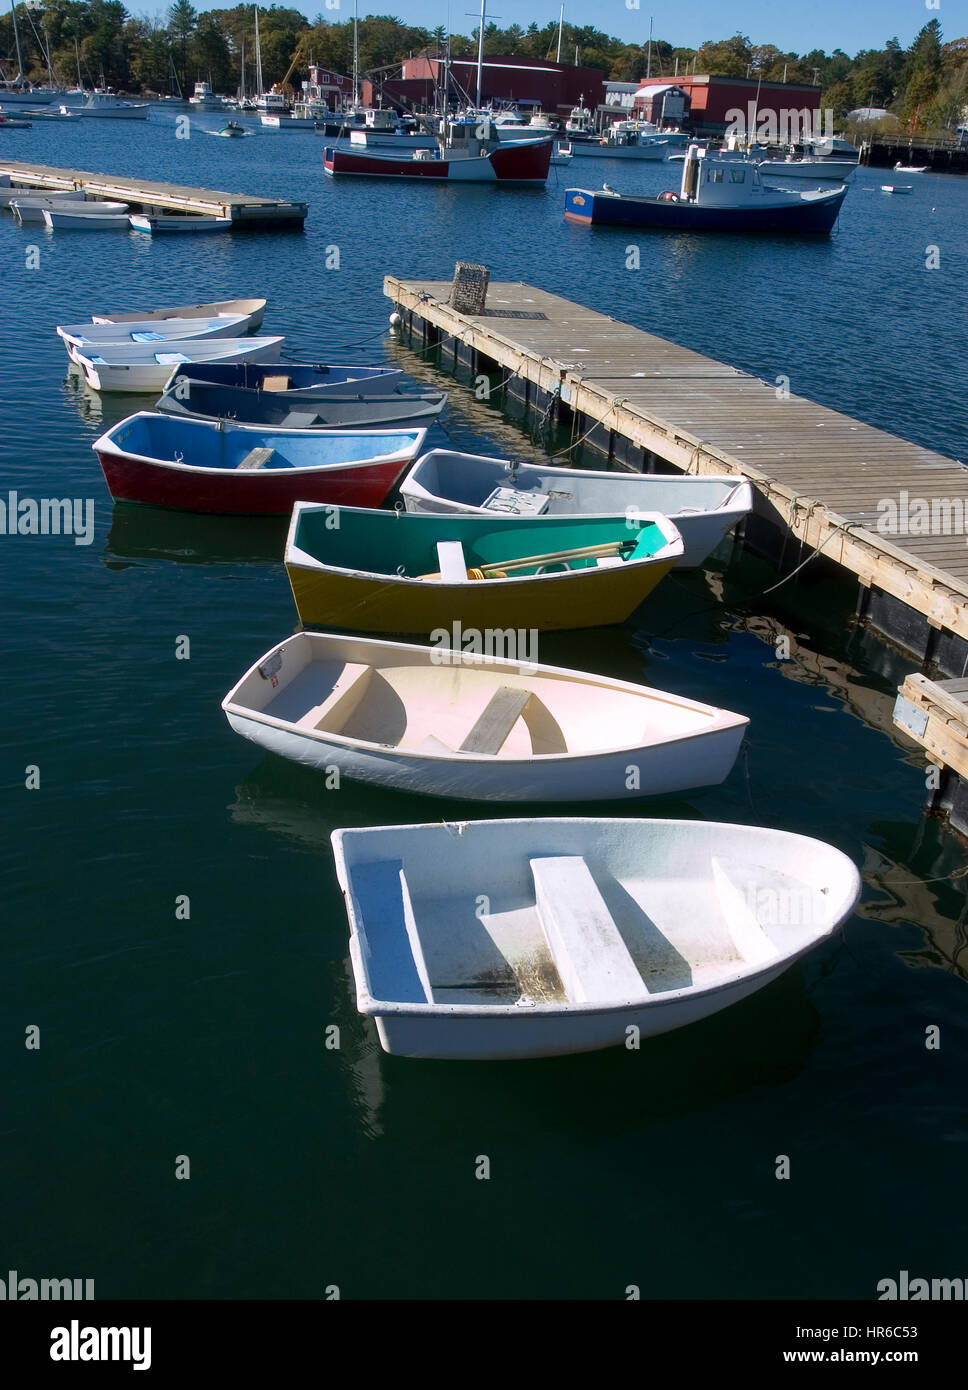 The dingy dock in the harbor of the seaside  town of Manchester by the Sea, Massachusetts - Setting for the movie of the same name. Stock Photo